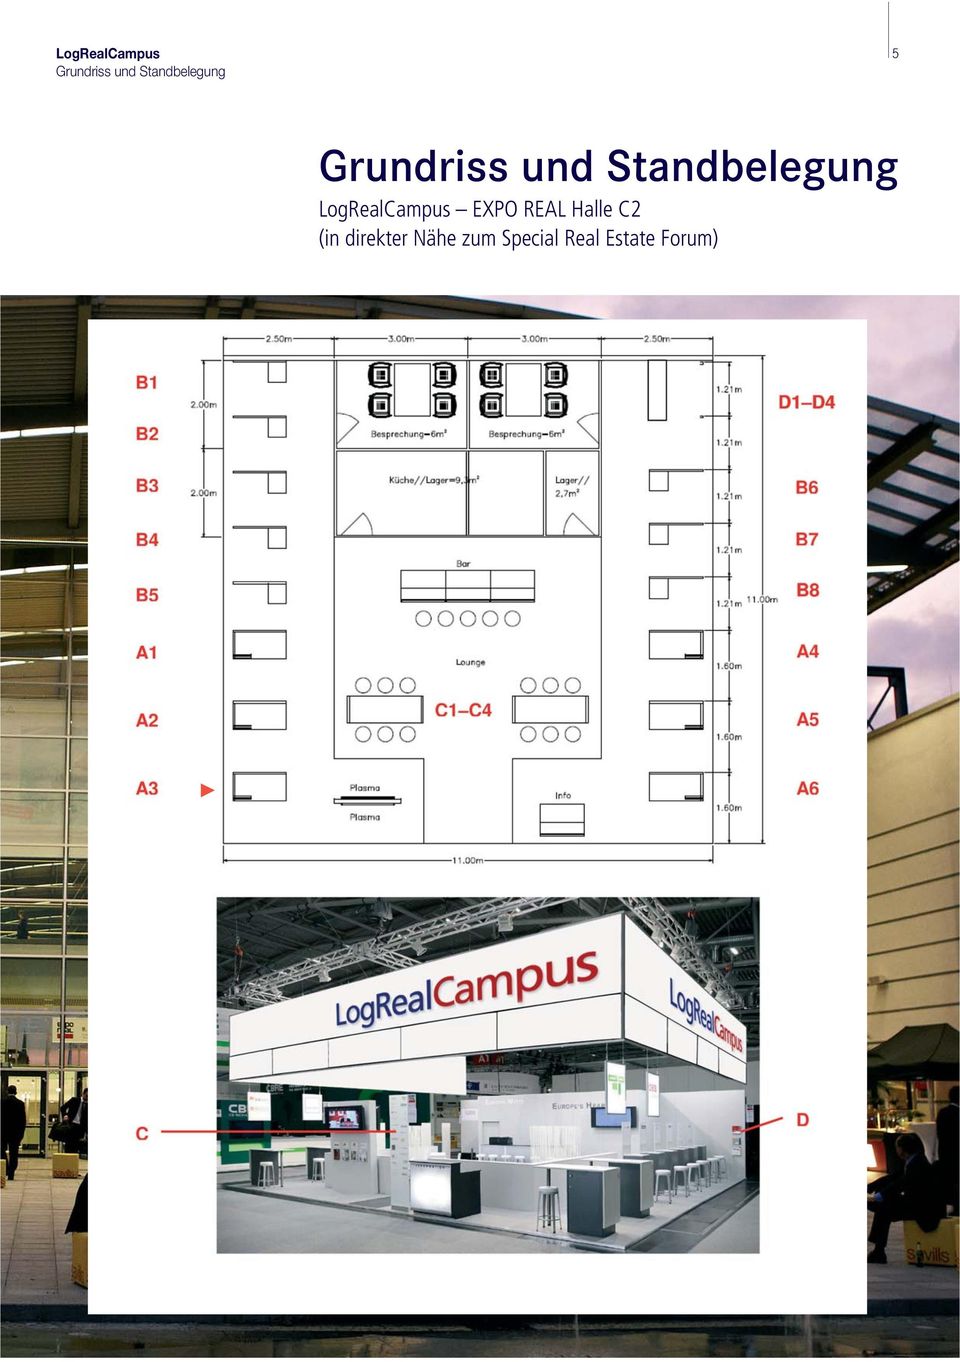 LogRealCampus EXPO REAL Halle C2